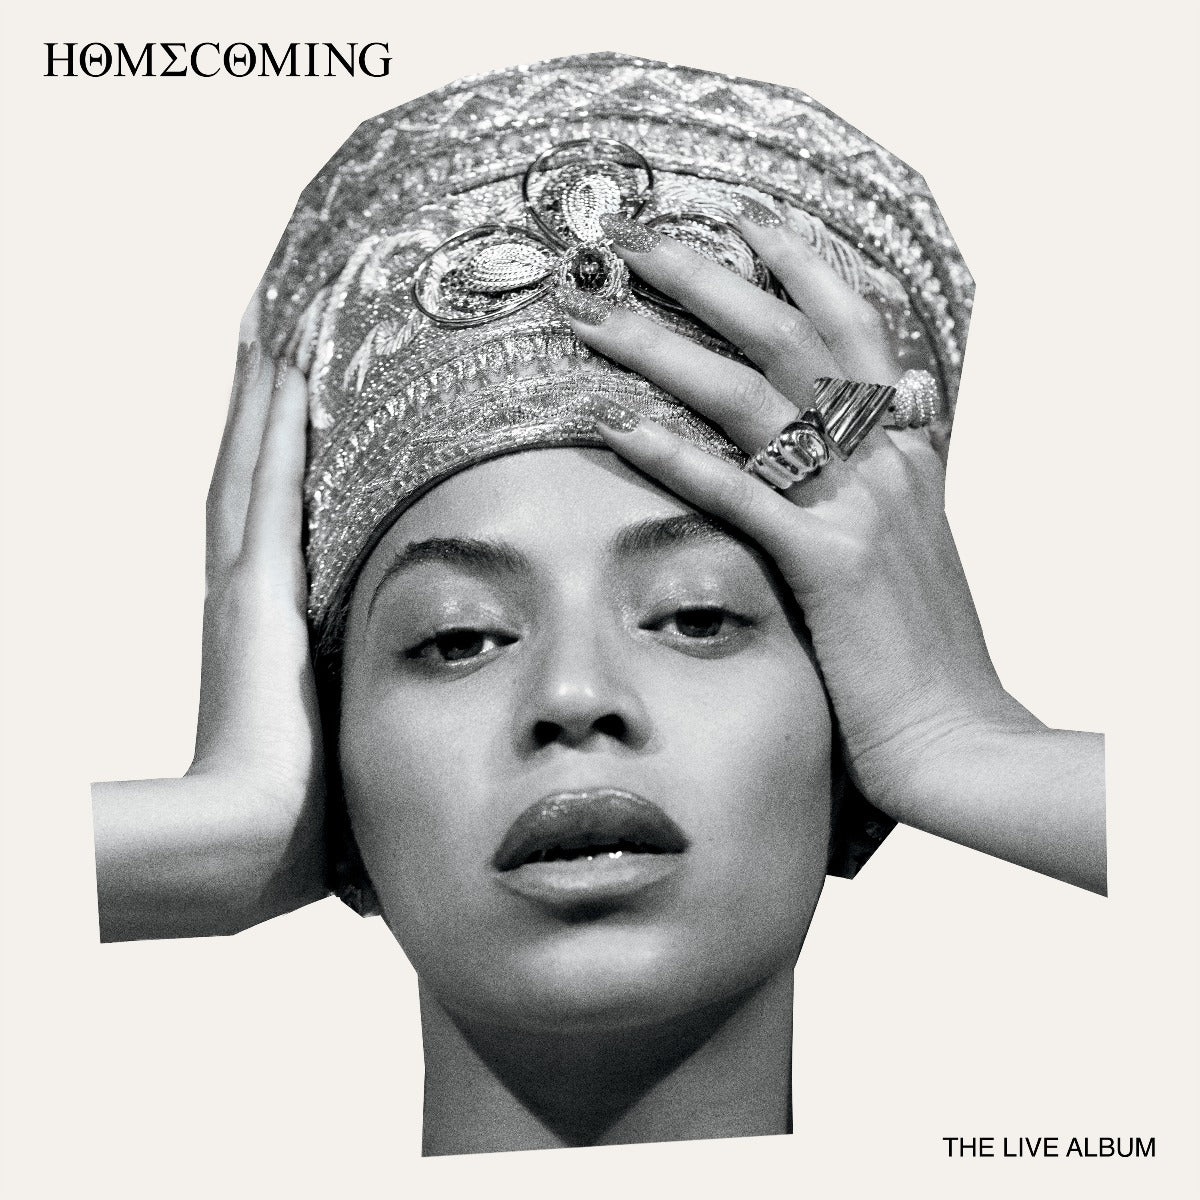 Beyoncé - HOMECOMING: THE LIVE ALBUM (4 LPs, in a slipcase jacket, with a 52 page insert booklet) - Vinyl